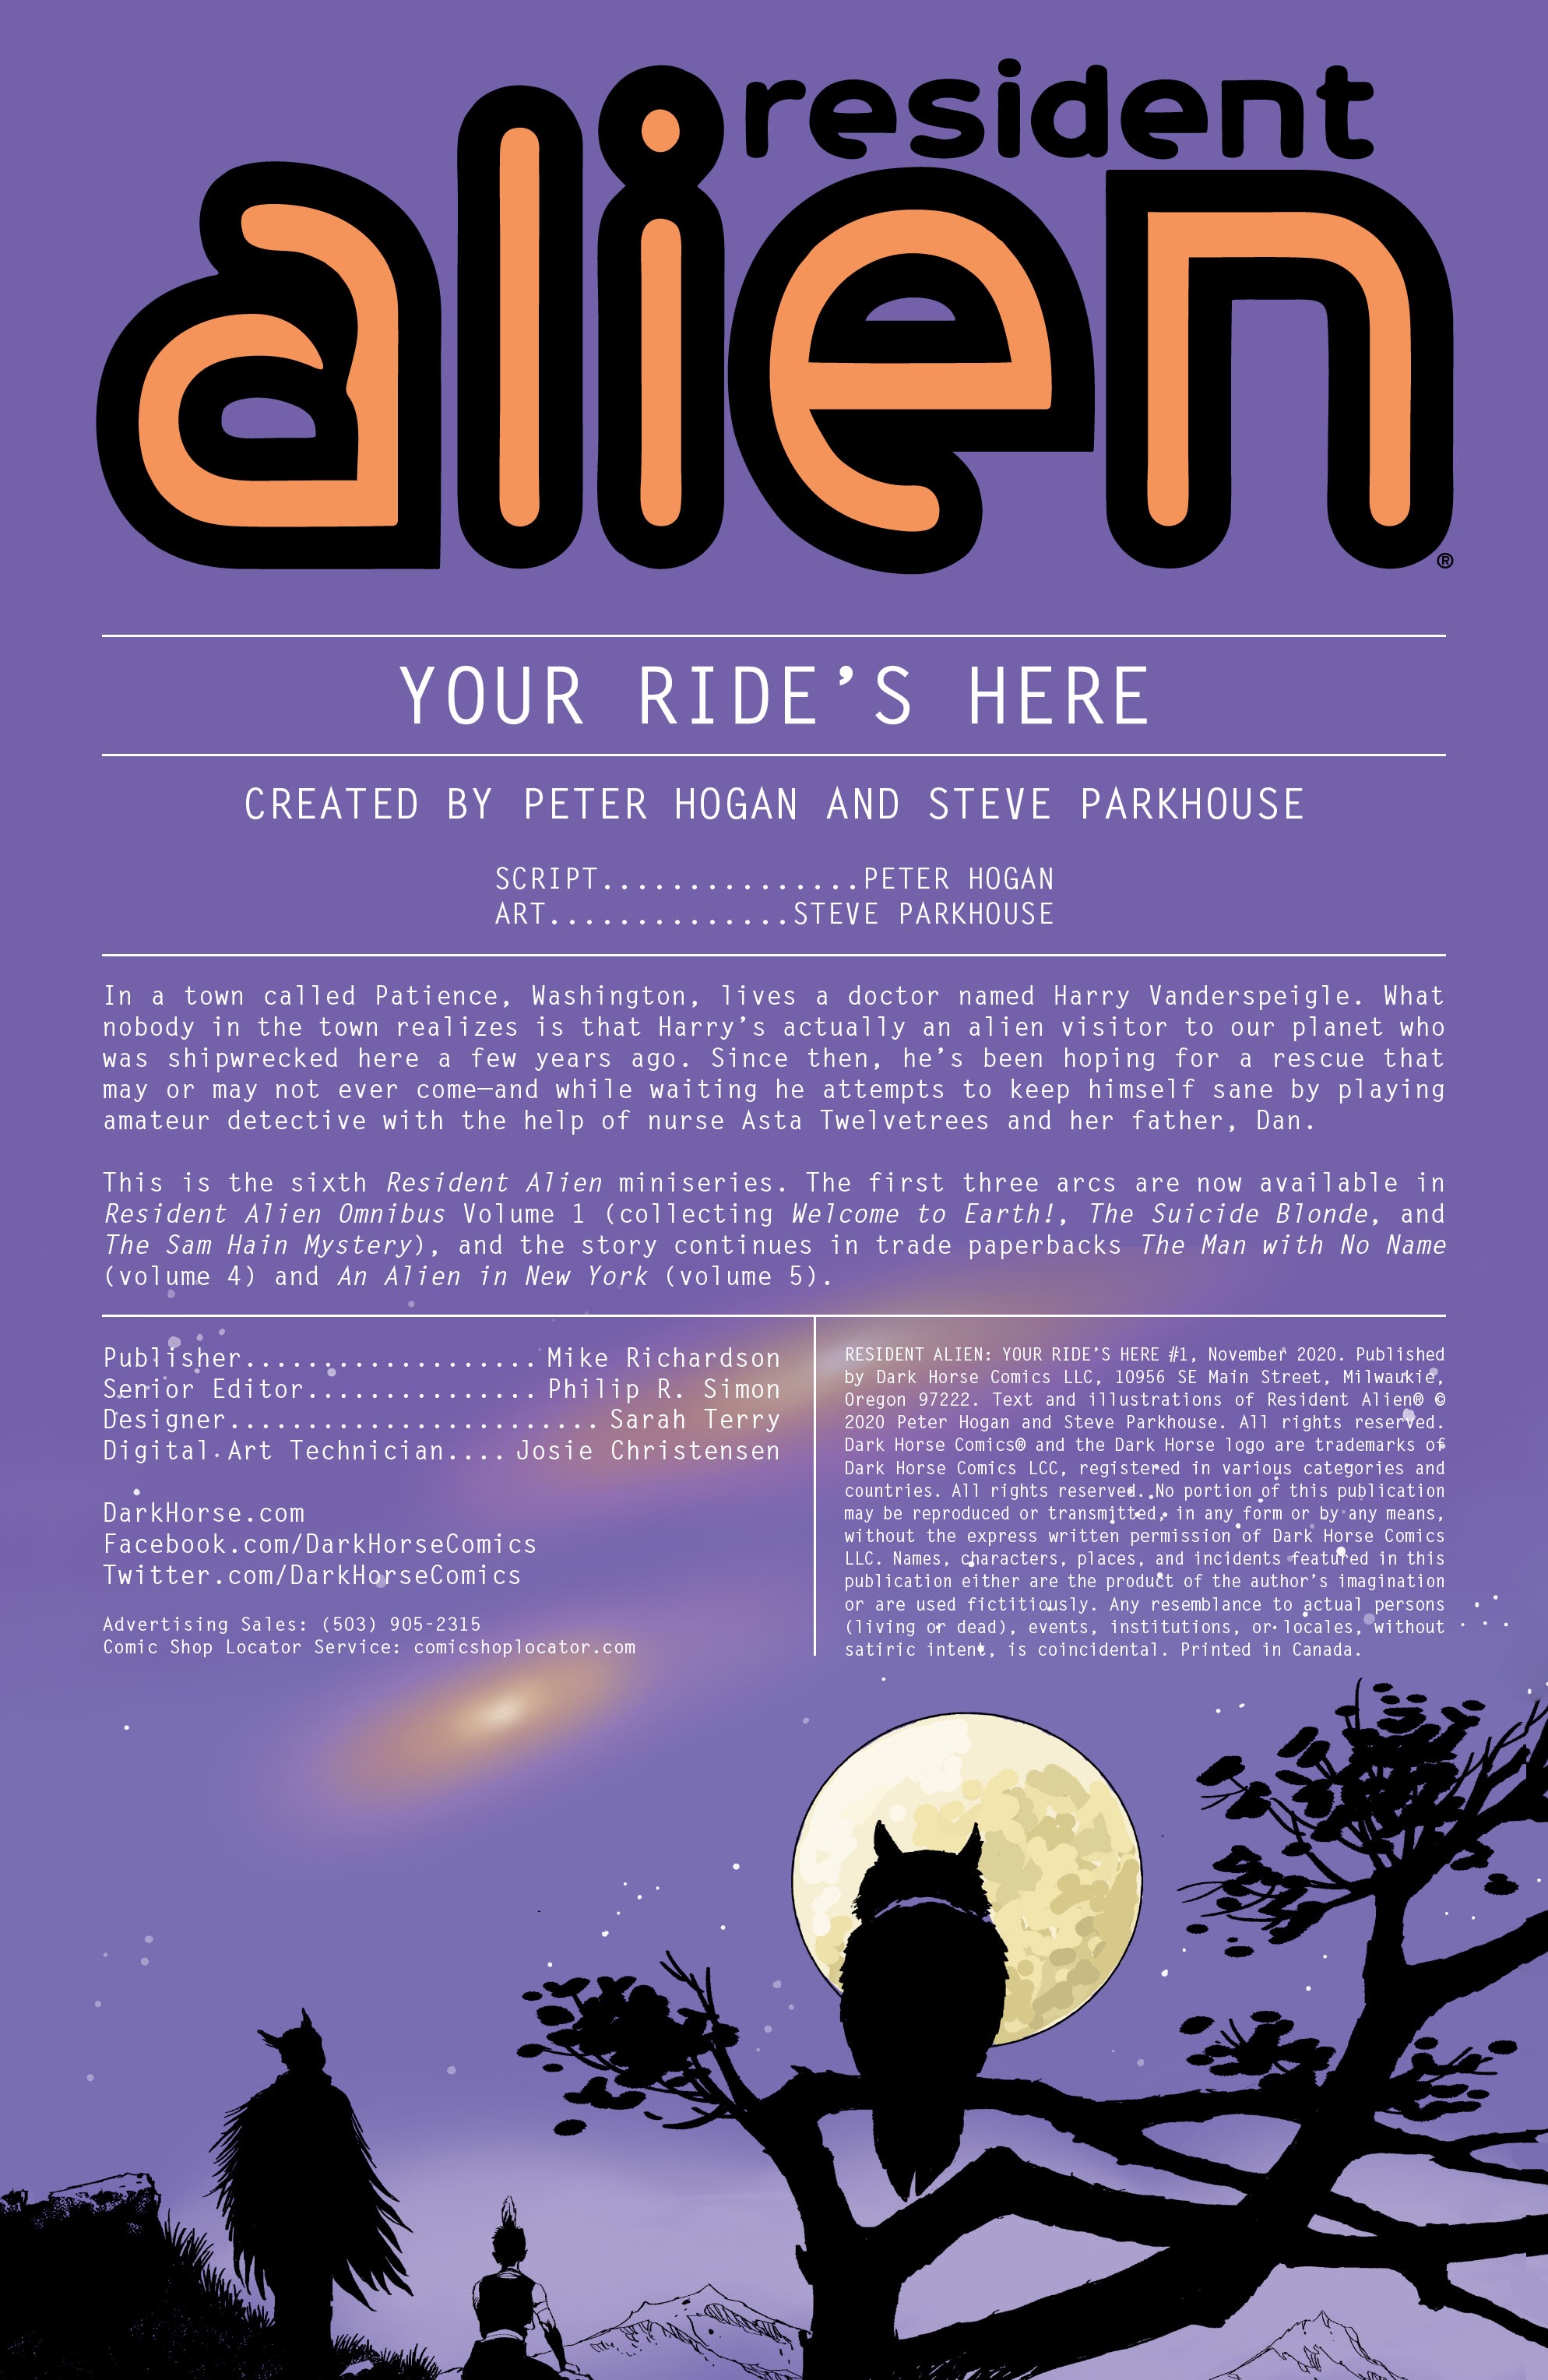 Read online Resident Alien: Your Ride's Here comic -  Issue #1 - 2